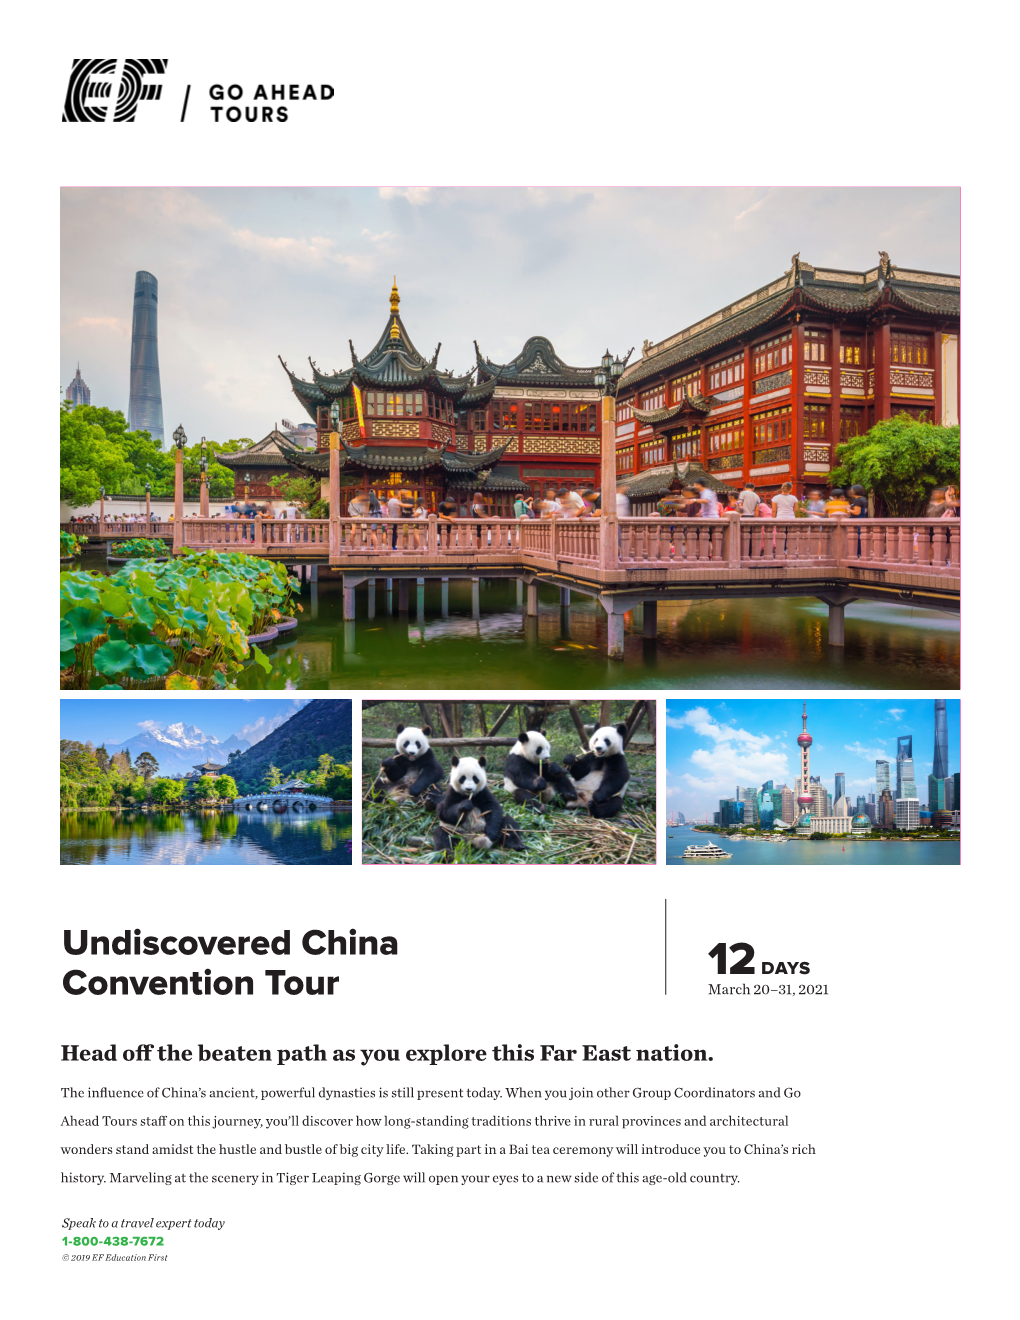 Undiscovered China Convention Tour